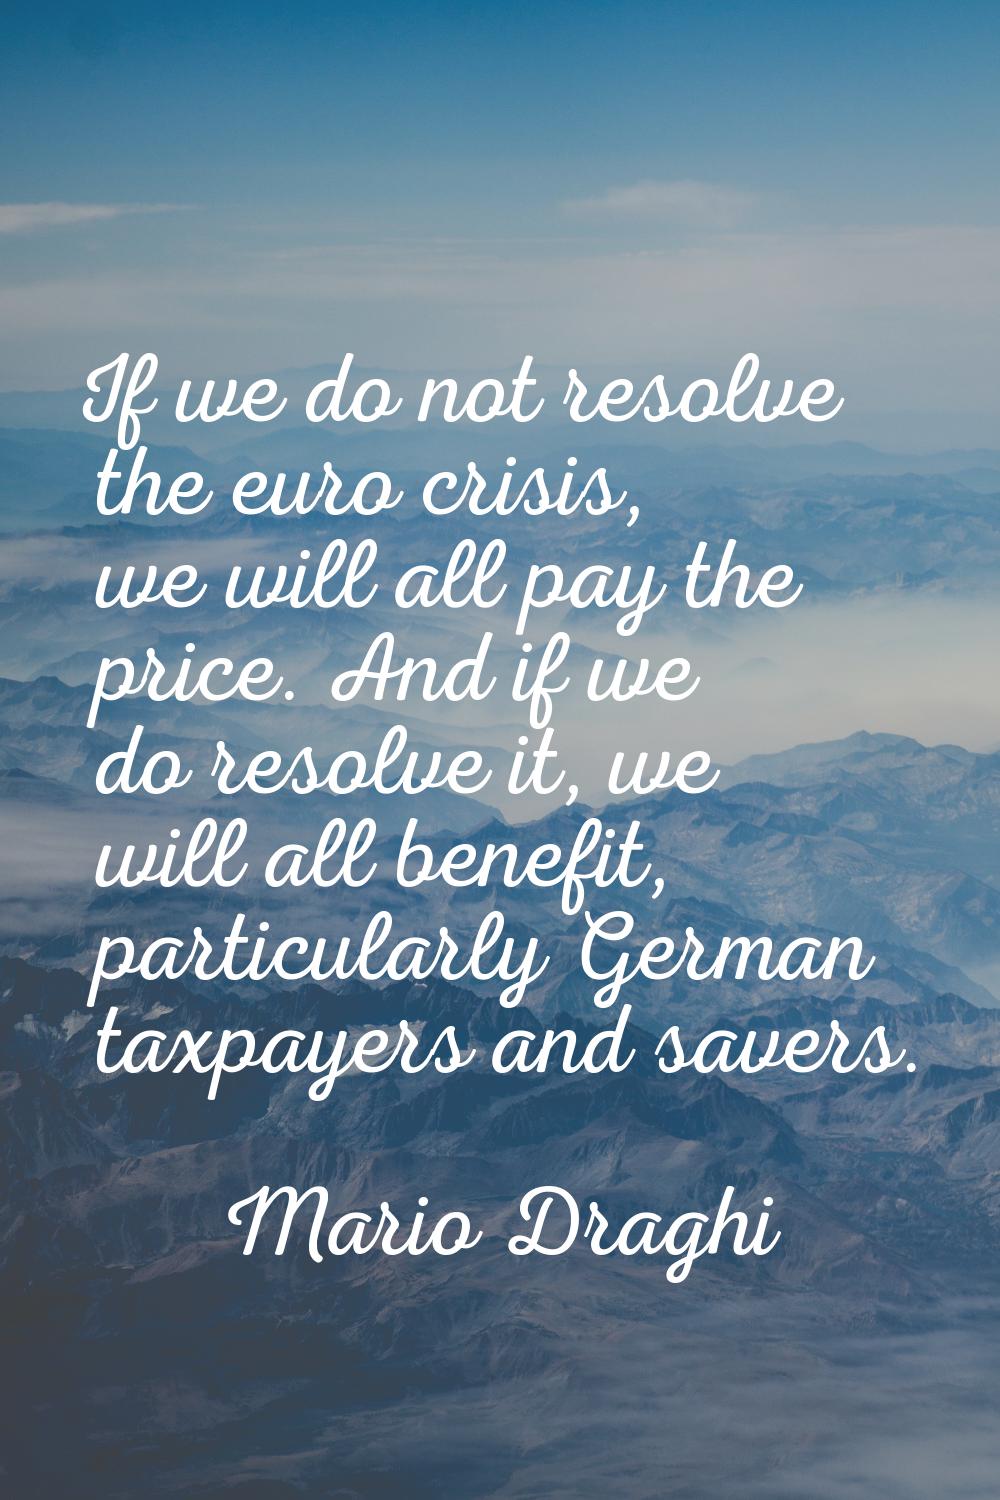 If we do not resolve the euro crisis, we will all pay the price. And if we do resolve it, we will a